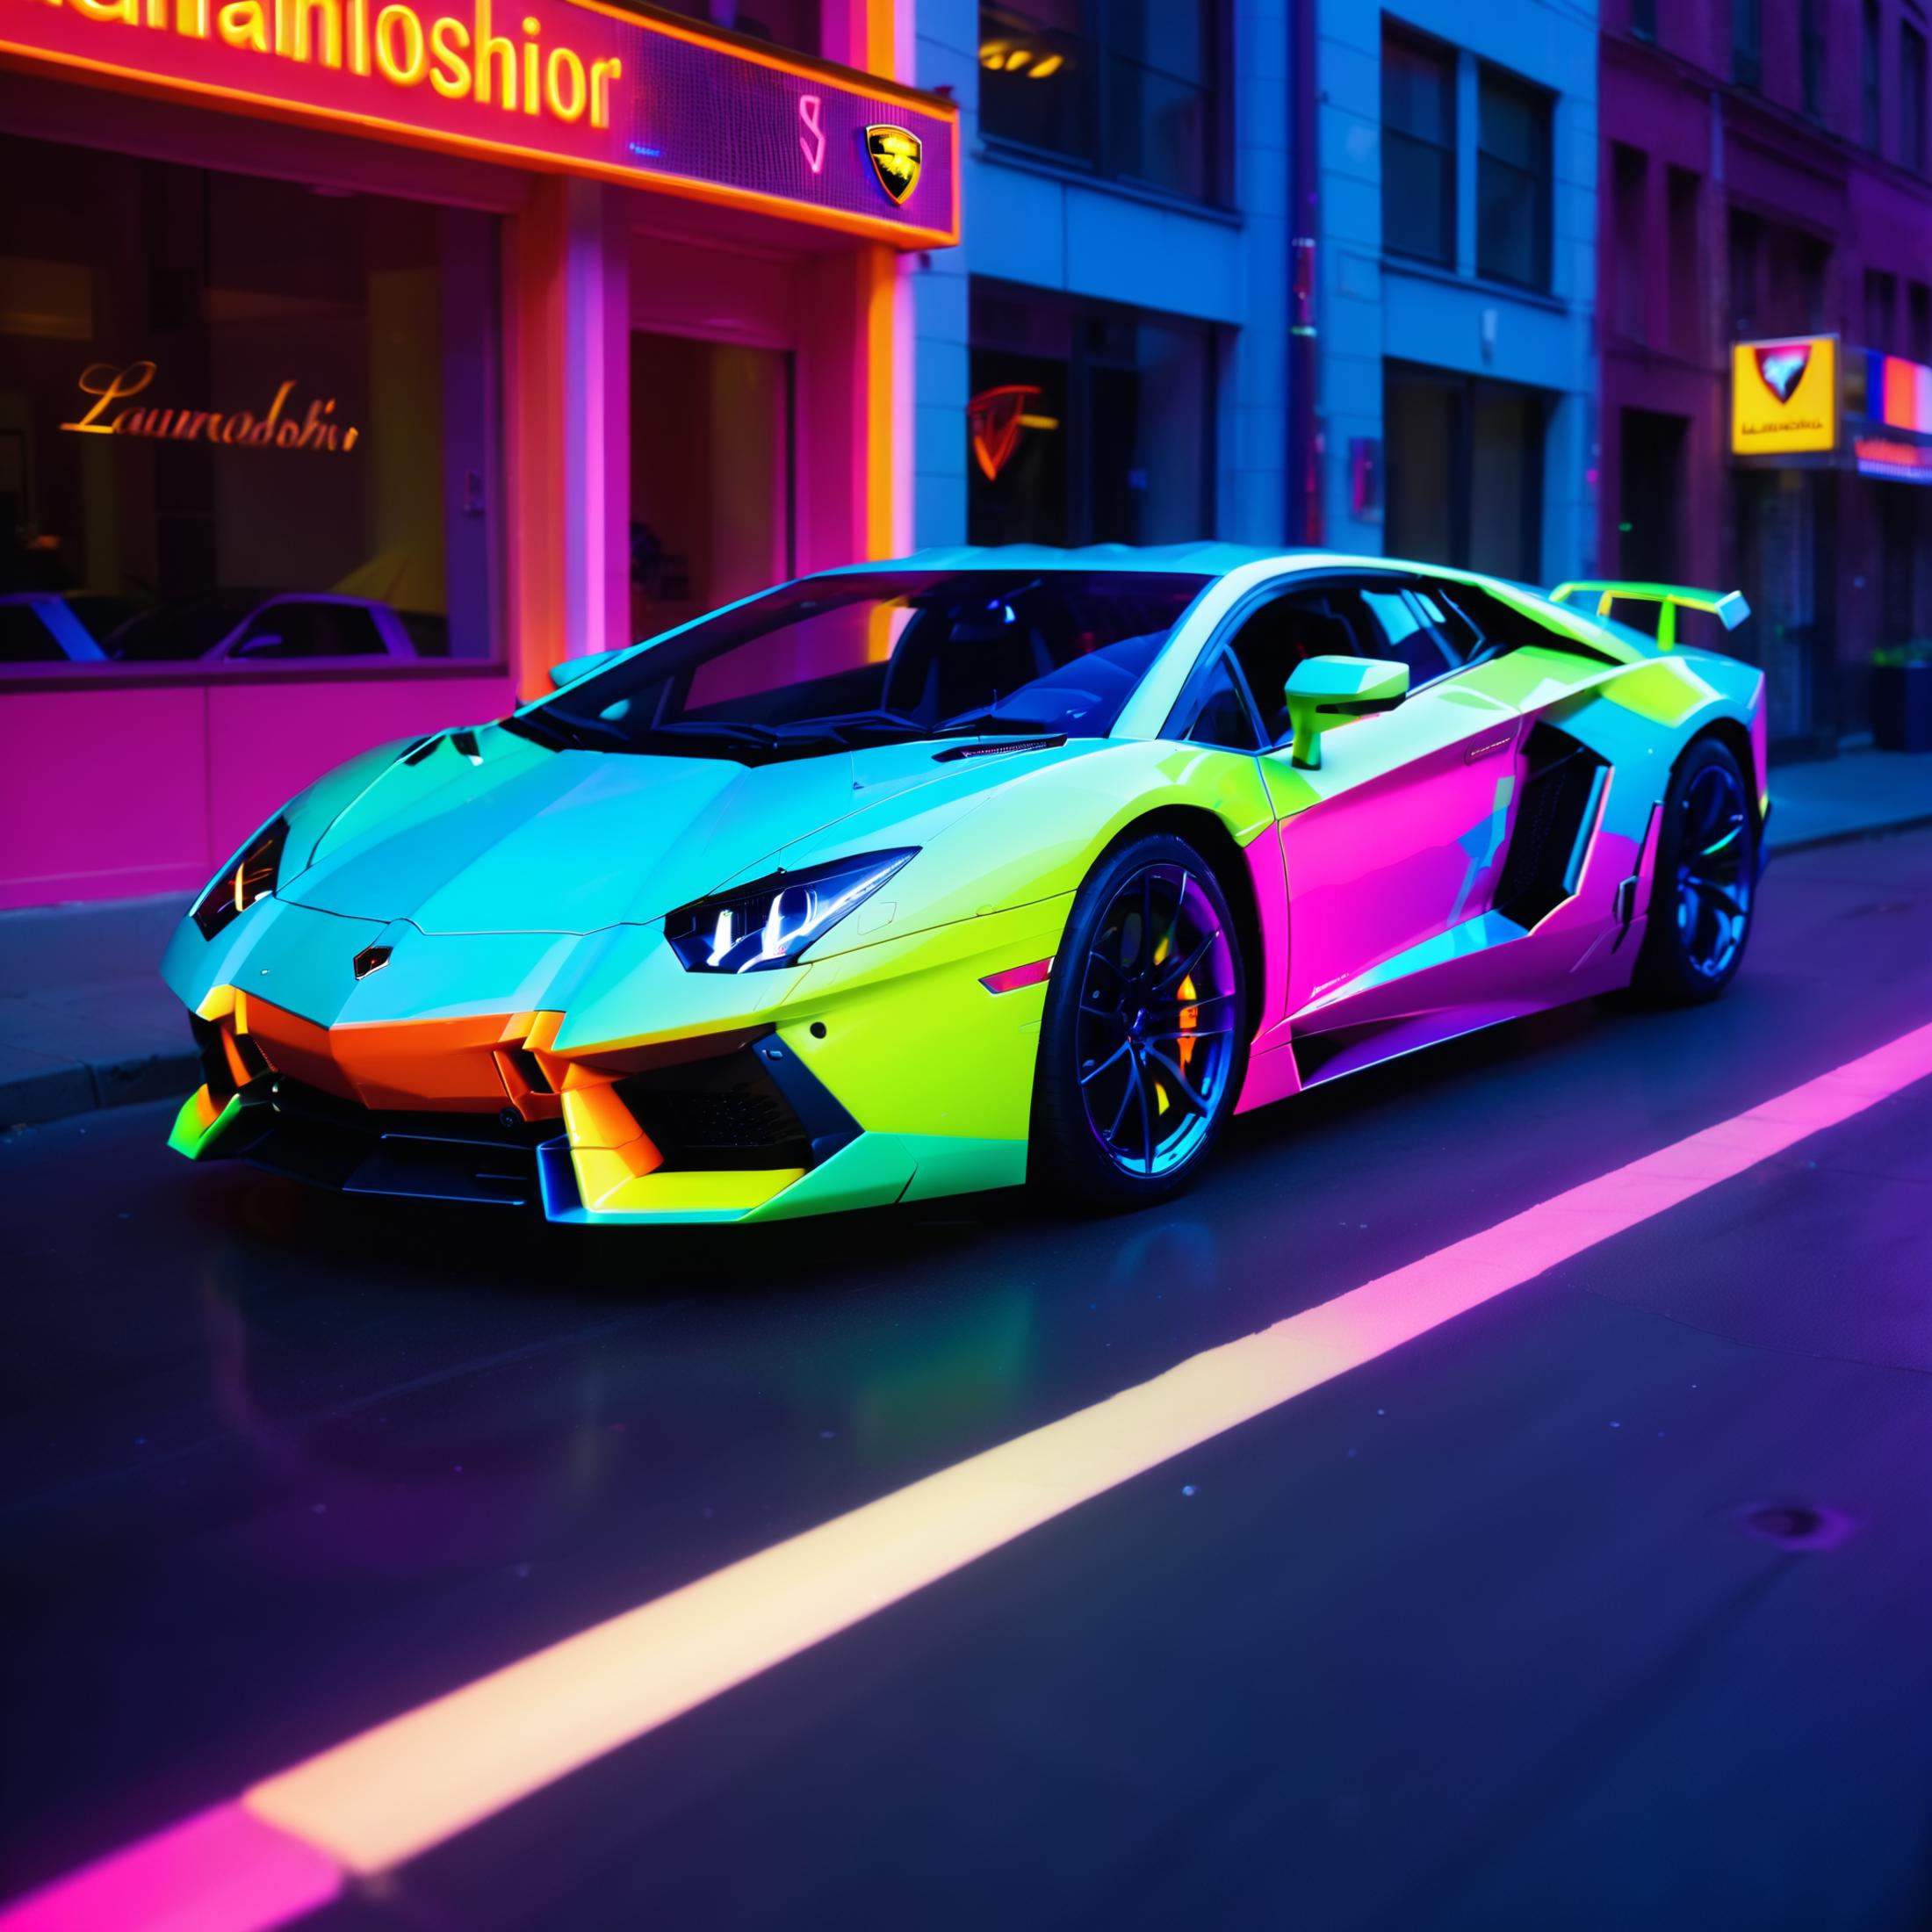 Neon Style XL image by humblemikey